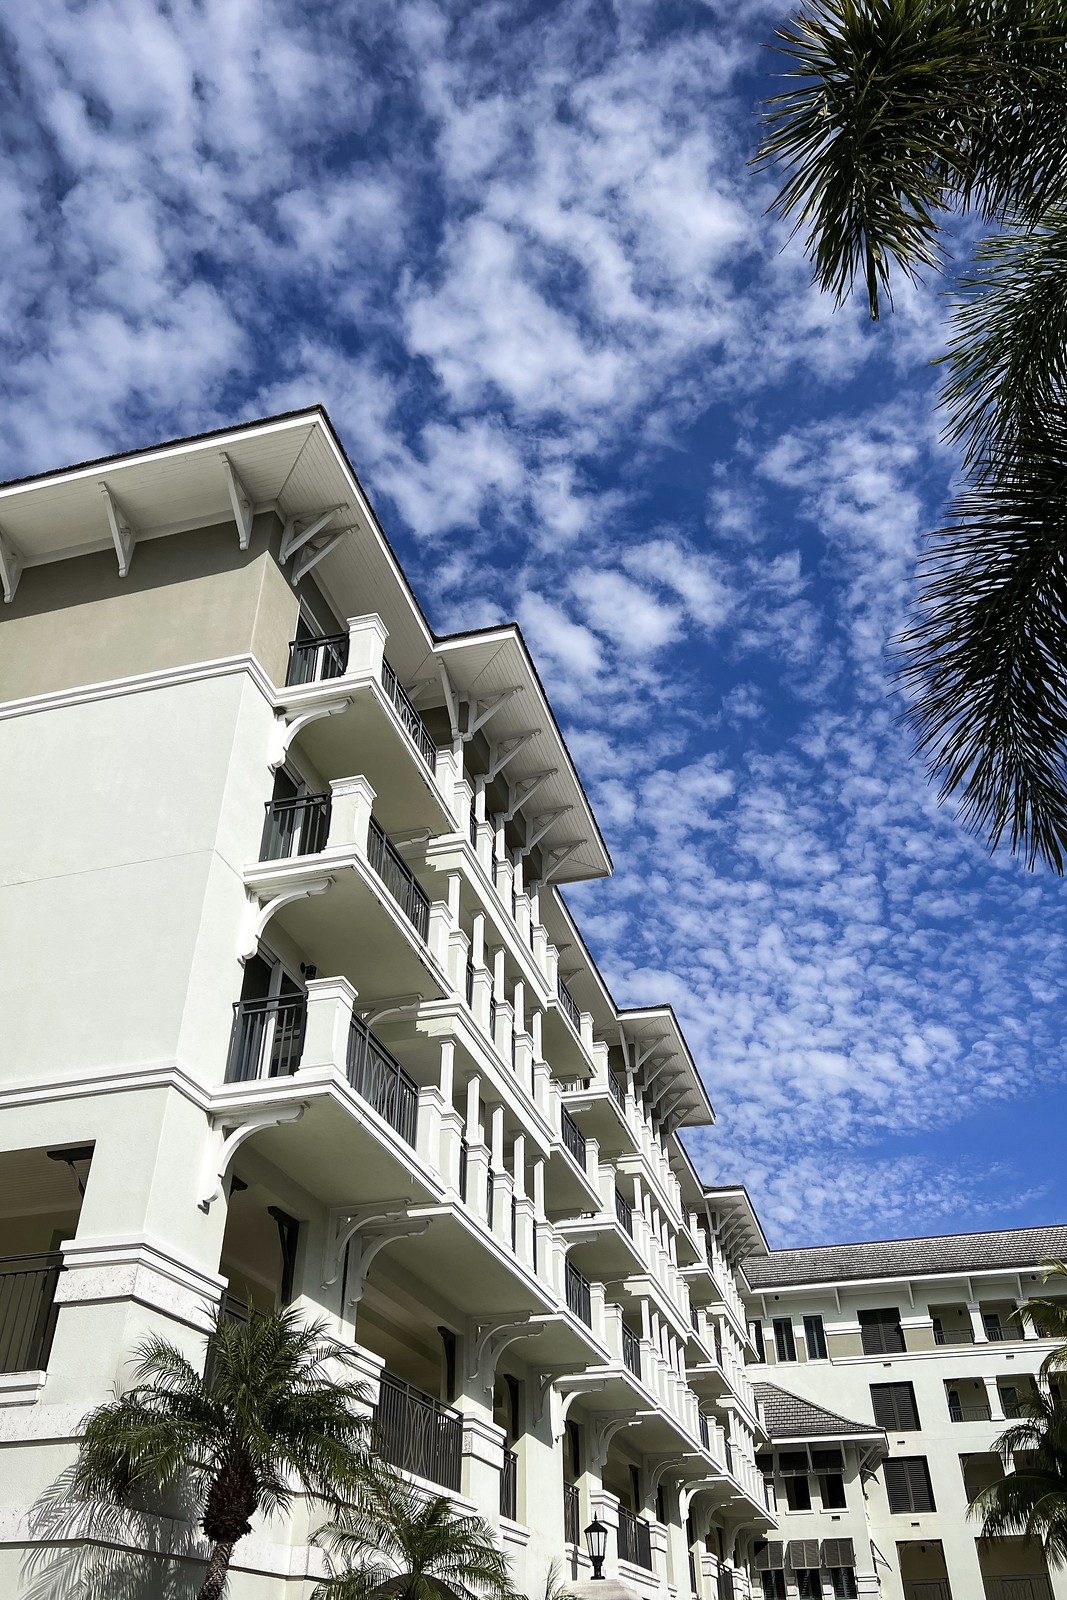 Kimpton Vero Beach Hotel & Spa | Where to Stay in Vero Beach | Hotels in Vero Beach | Best Things to Do in Vero Beach, Florida | Ultimate Travel Guide Vero Beach, FL | What to do in Vero Beach | Best Restaurants Vero Beach | What to Eat in Vero Beach Florida | Visit Indian River County Florida | Treasure Coast Travel Guide | Southern Florida Vacation